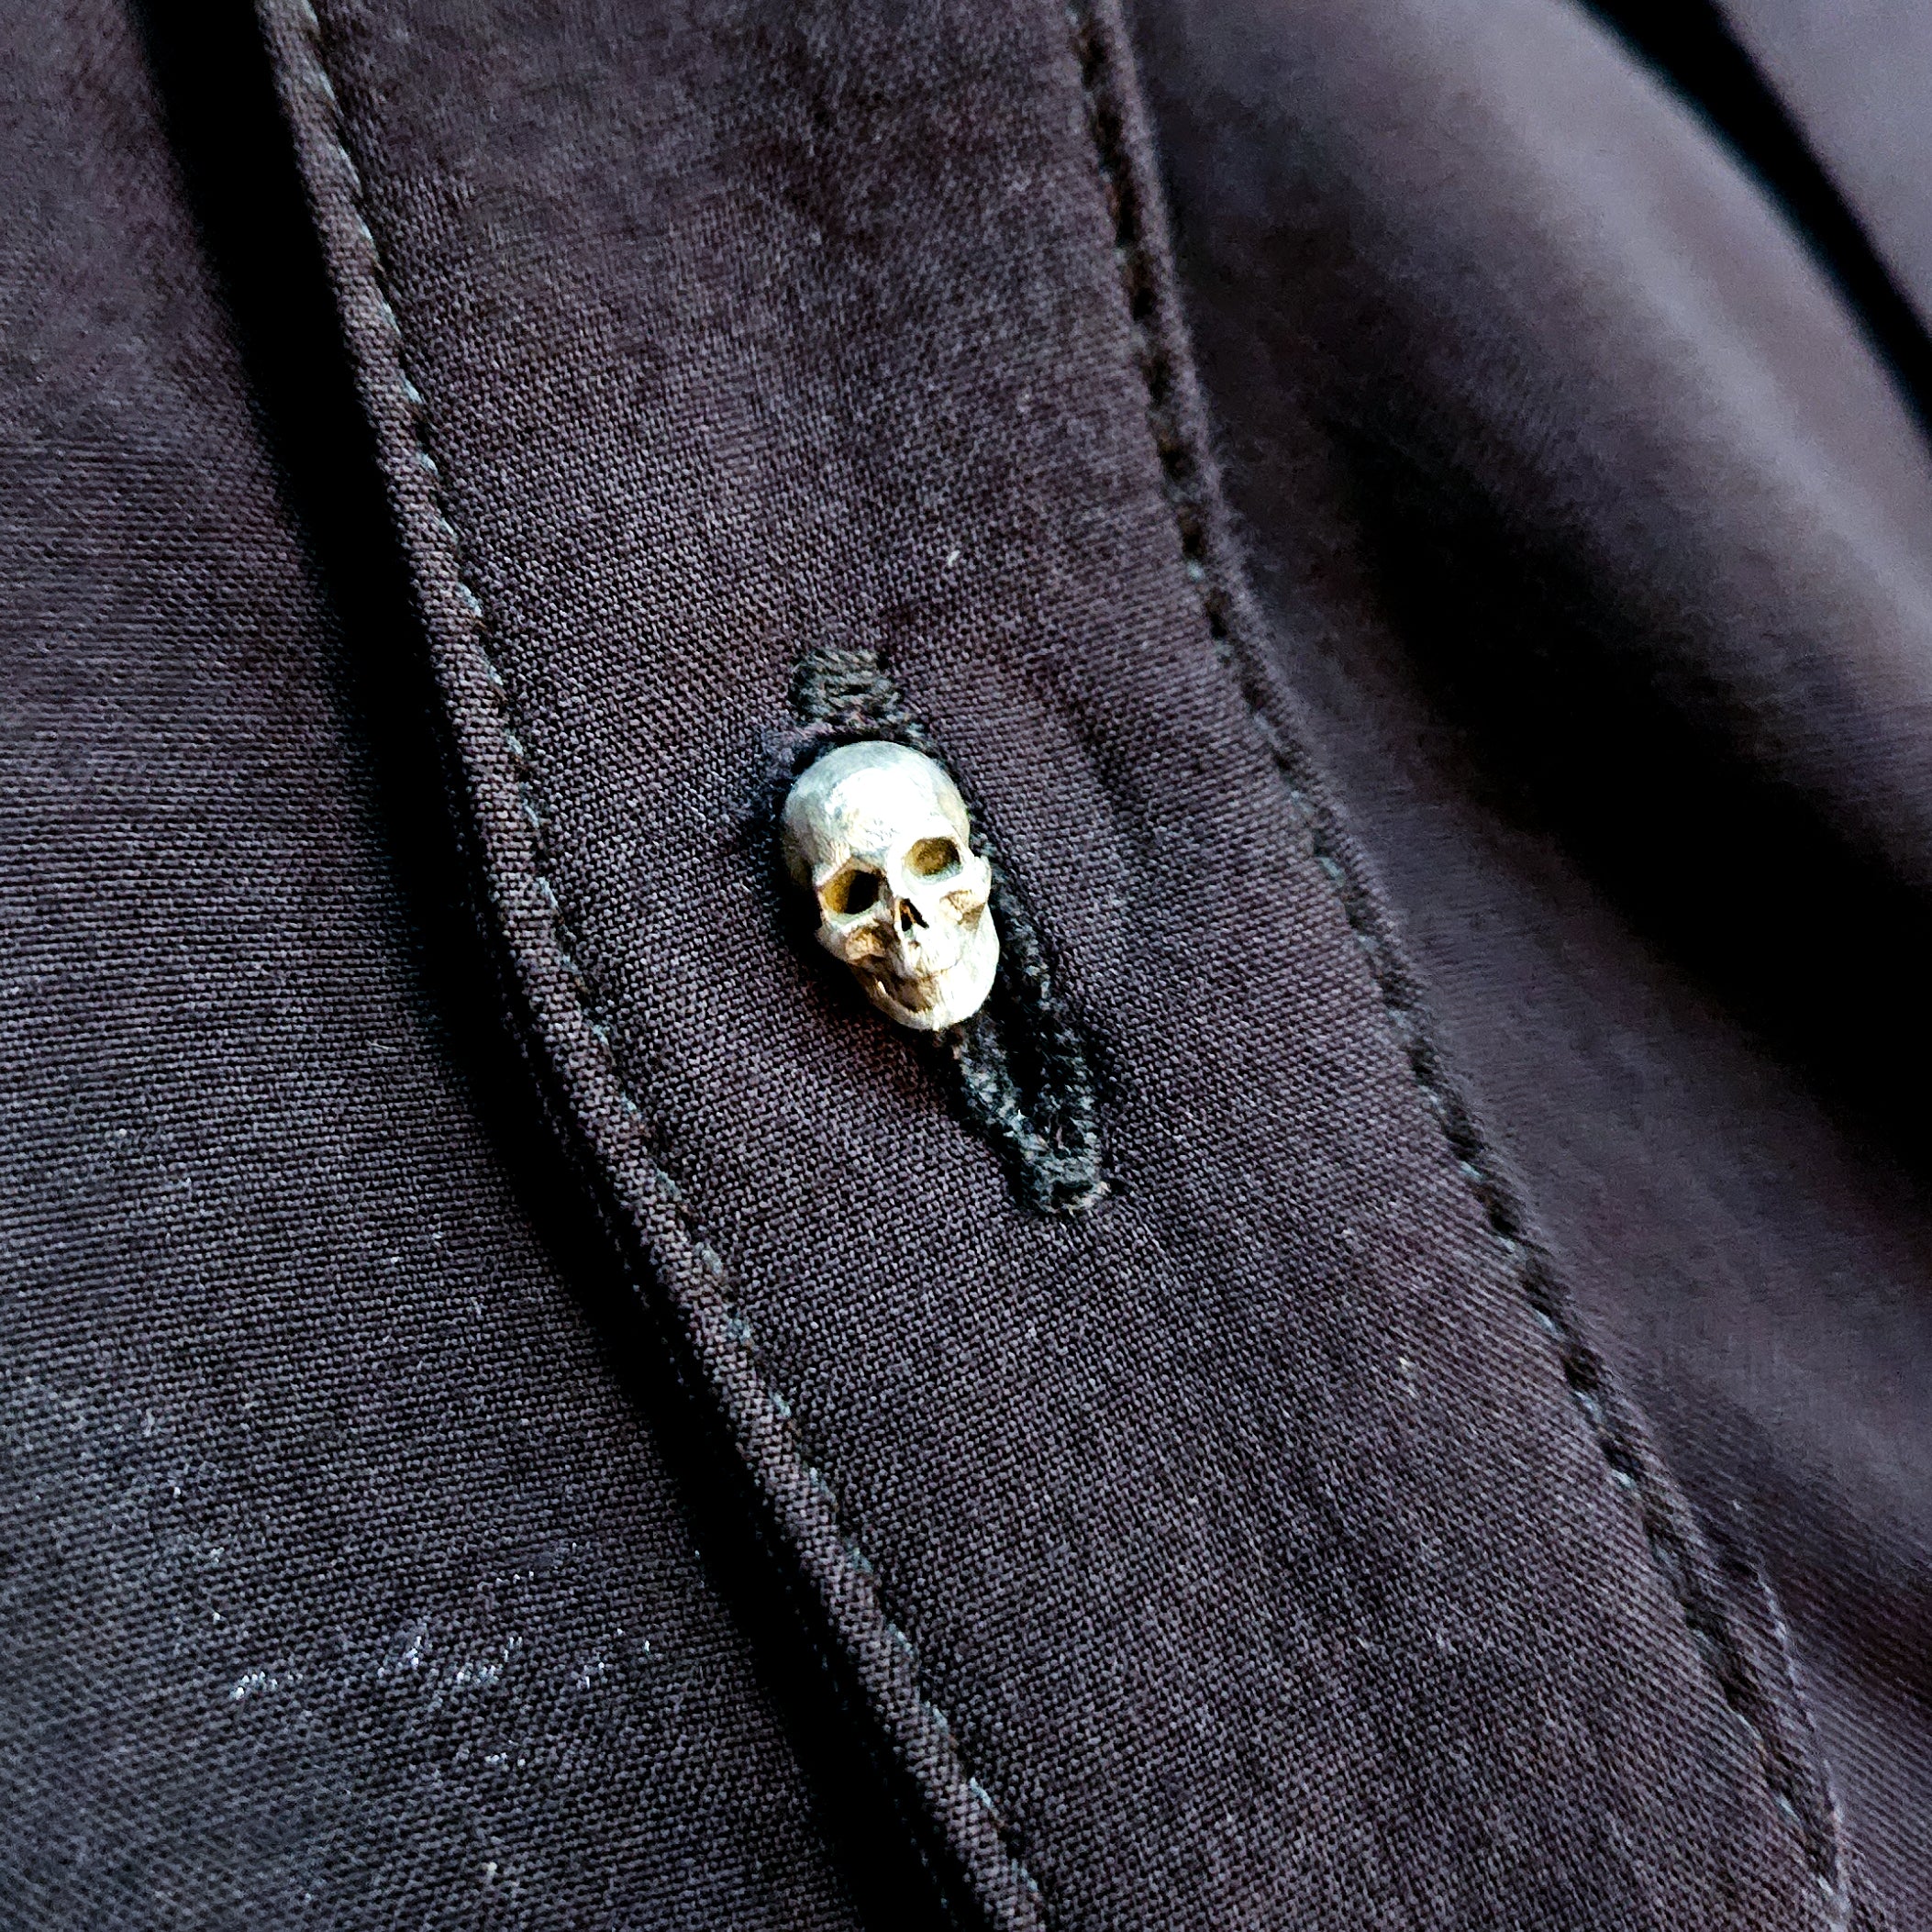 Sterling Silver Skull Buttons